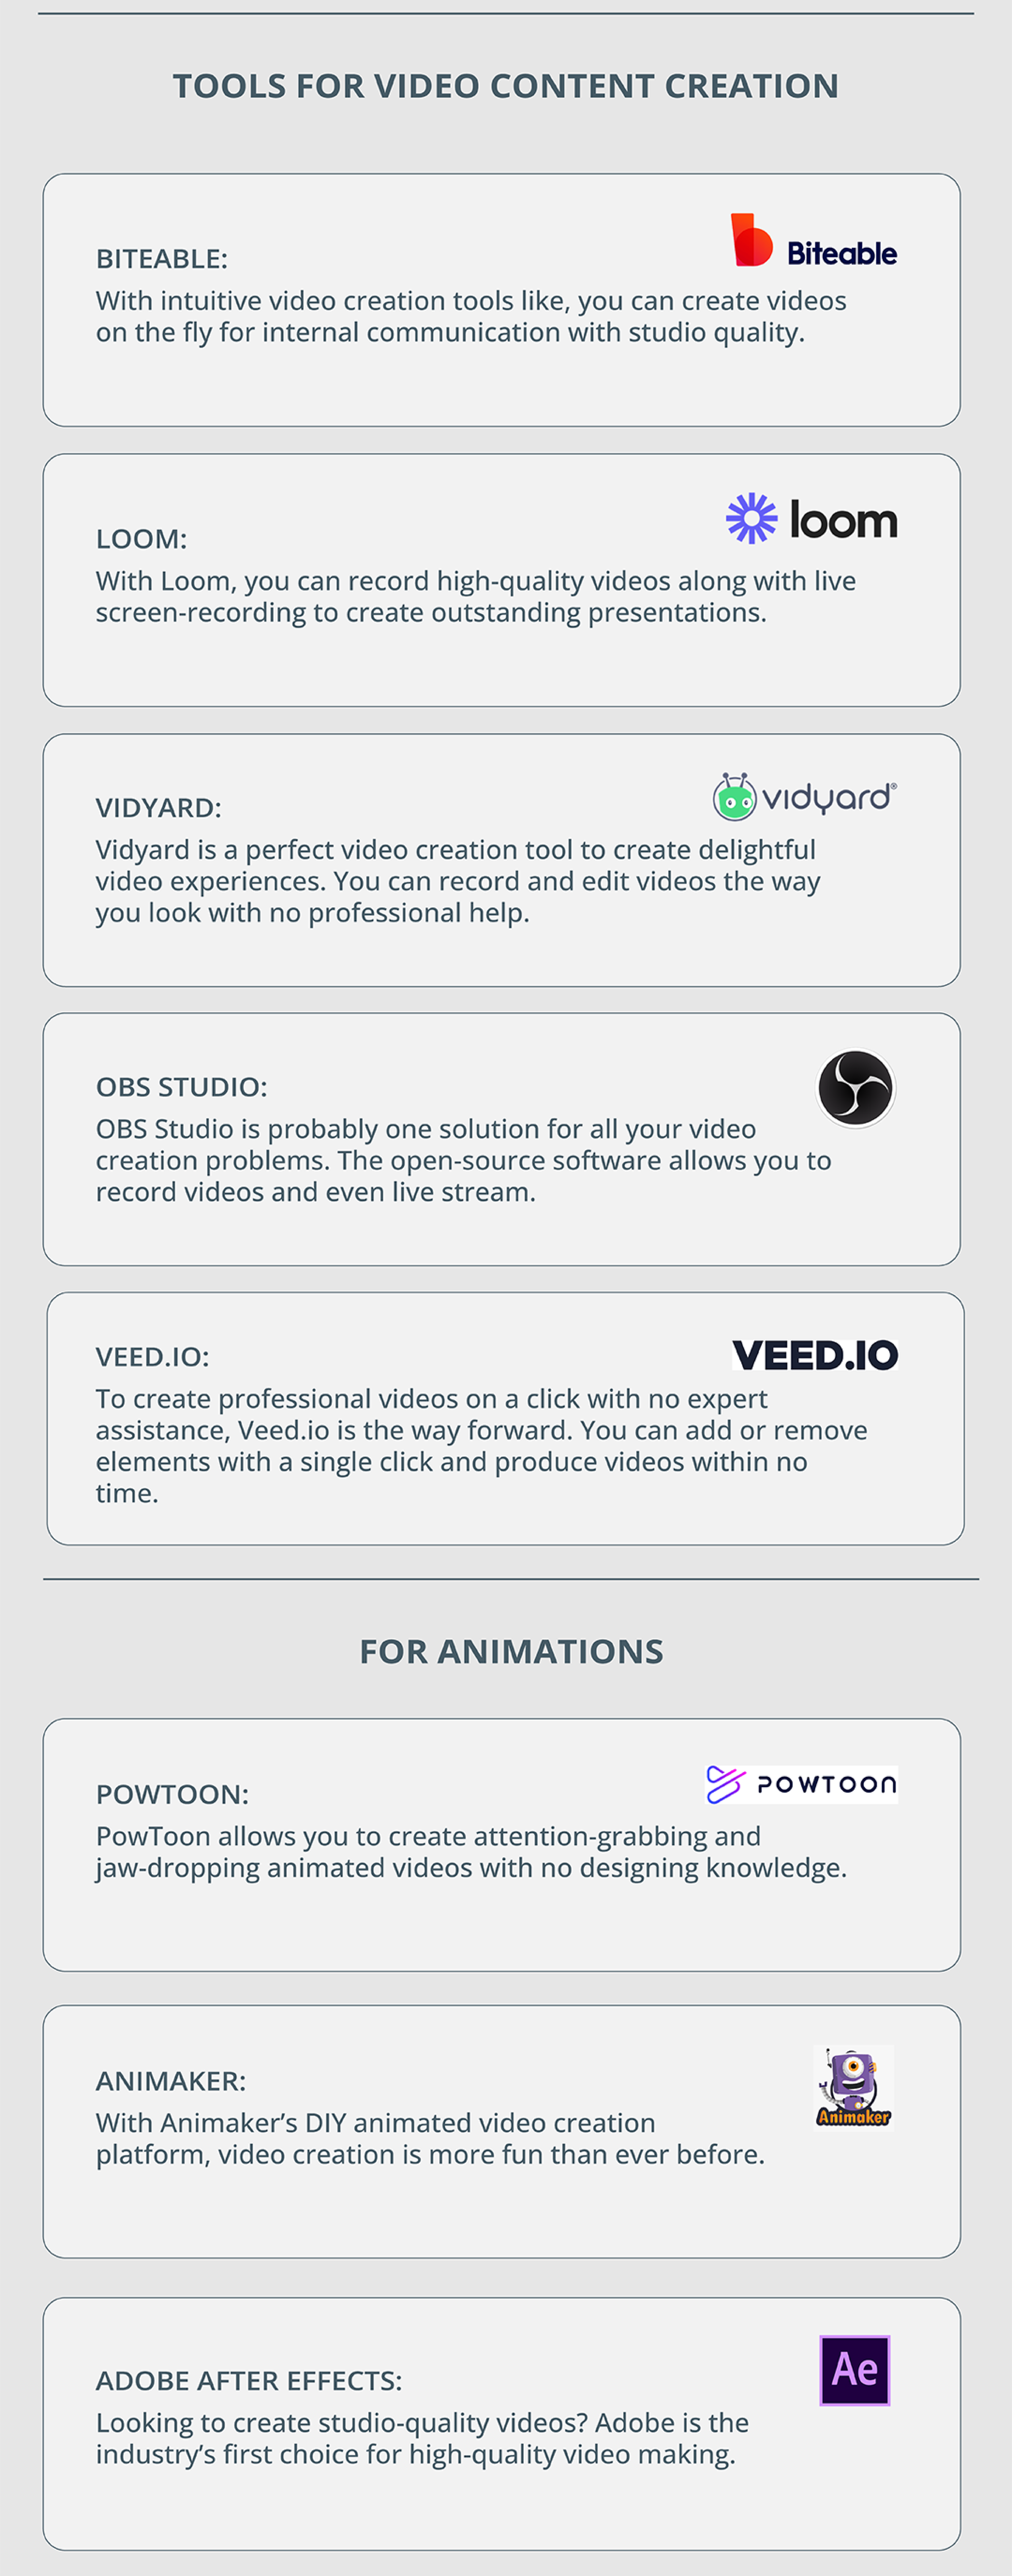 Tools for video content creation